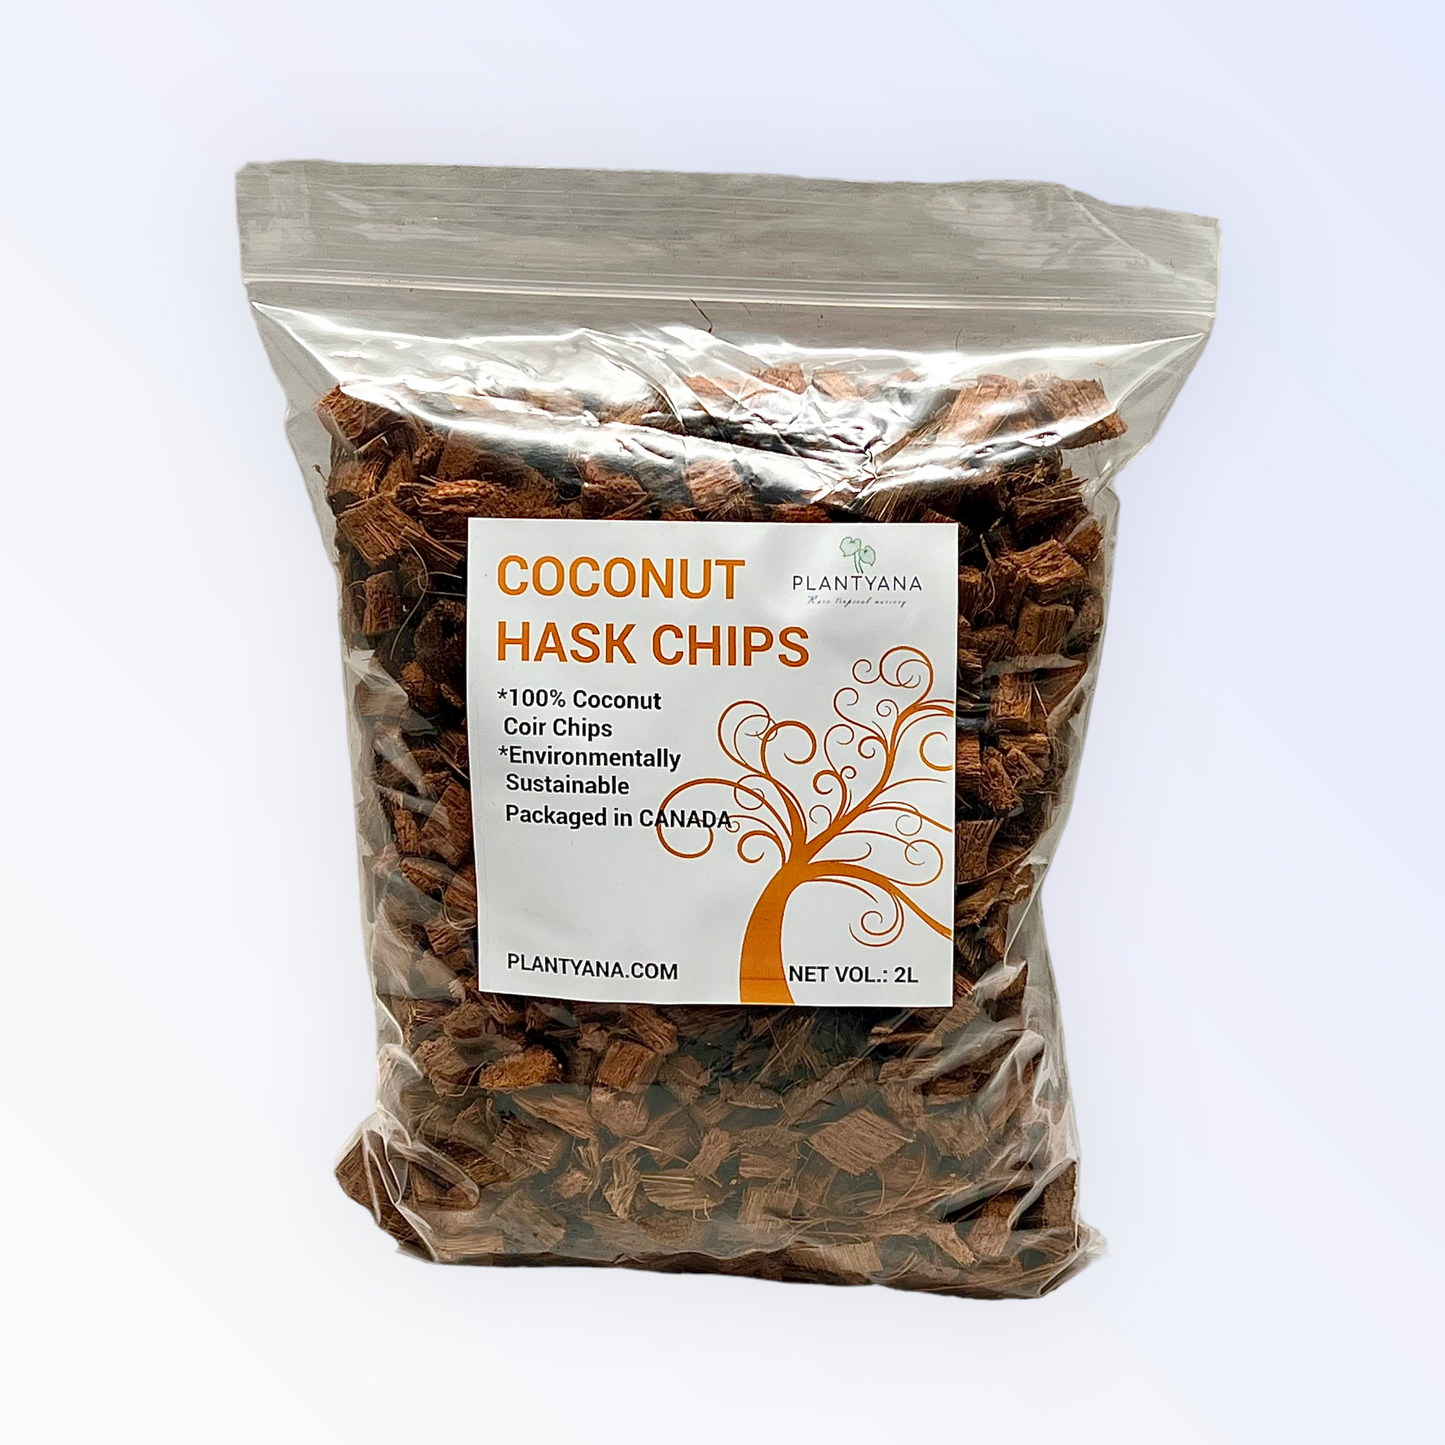 Coconut Hask Chips